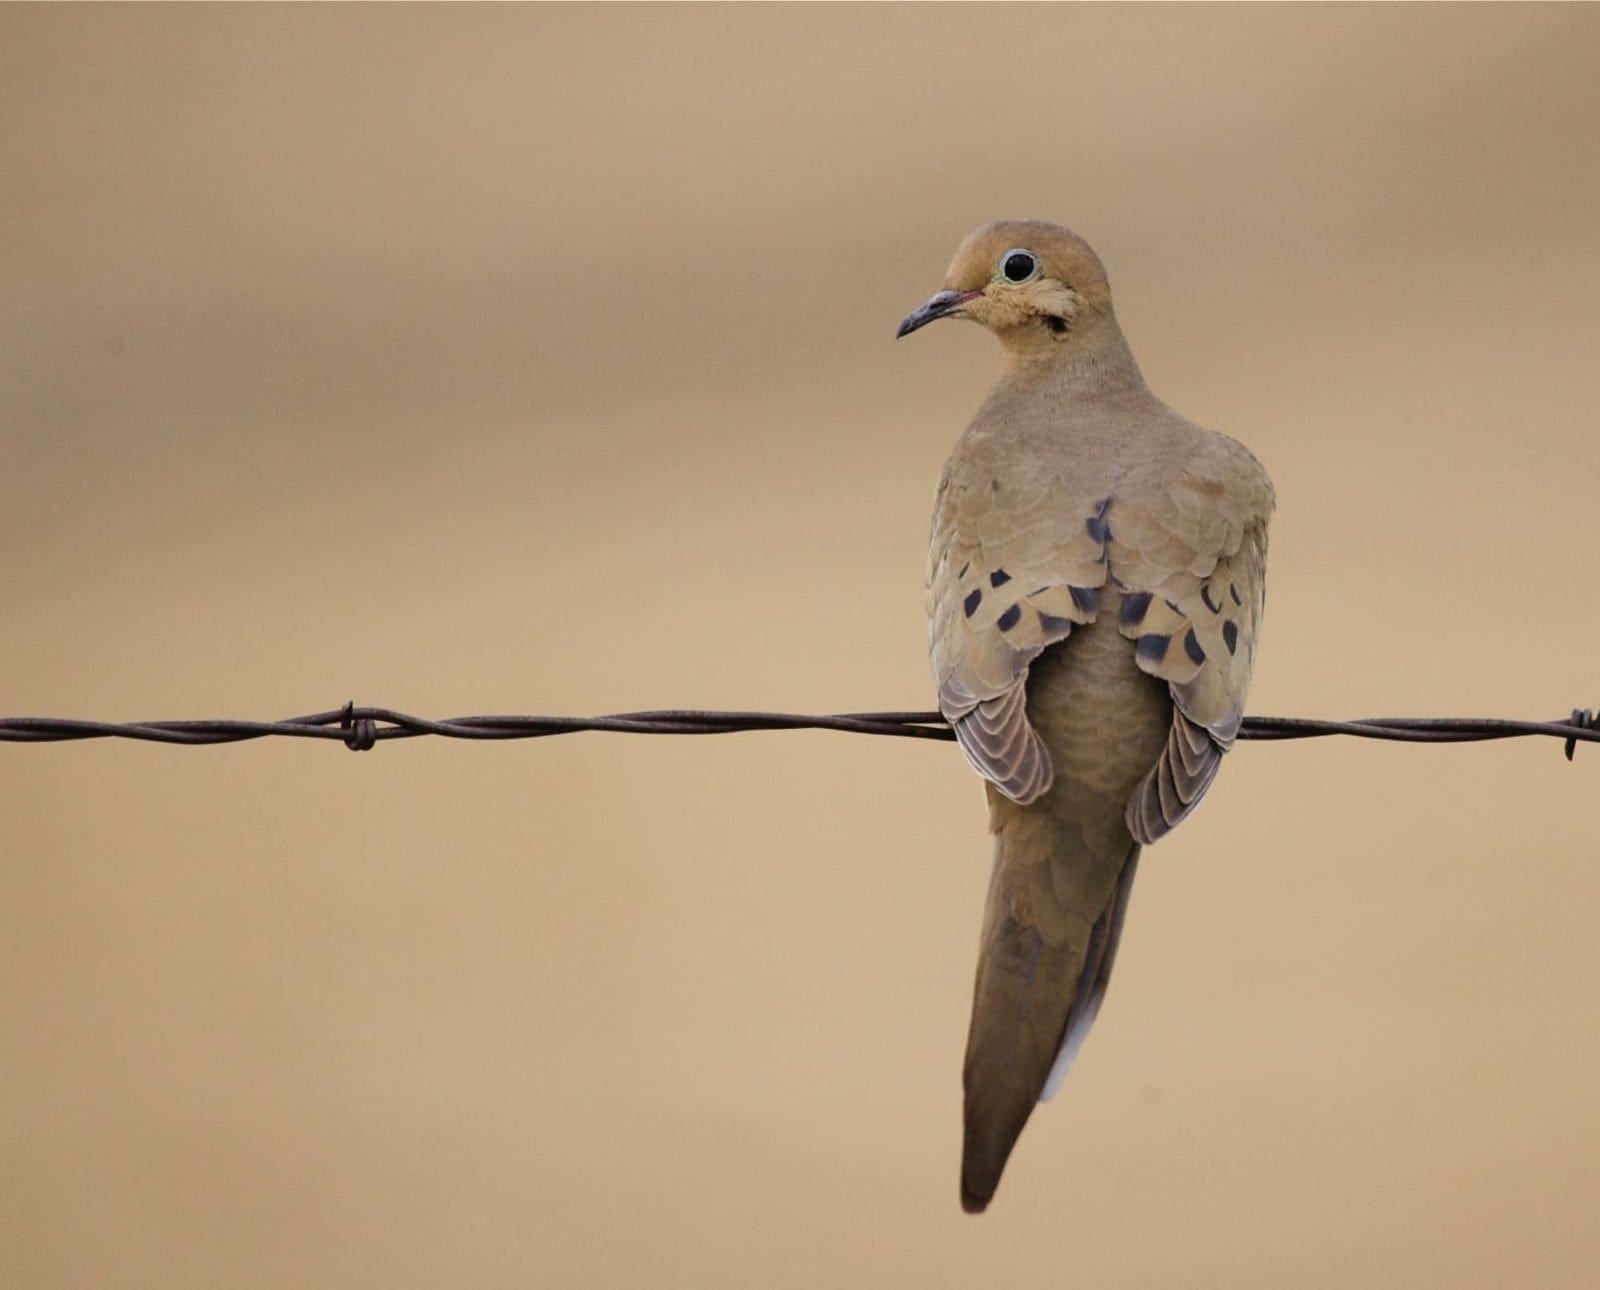 A dove on a barb wire fence